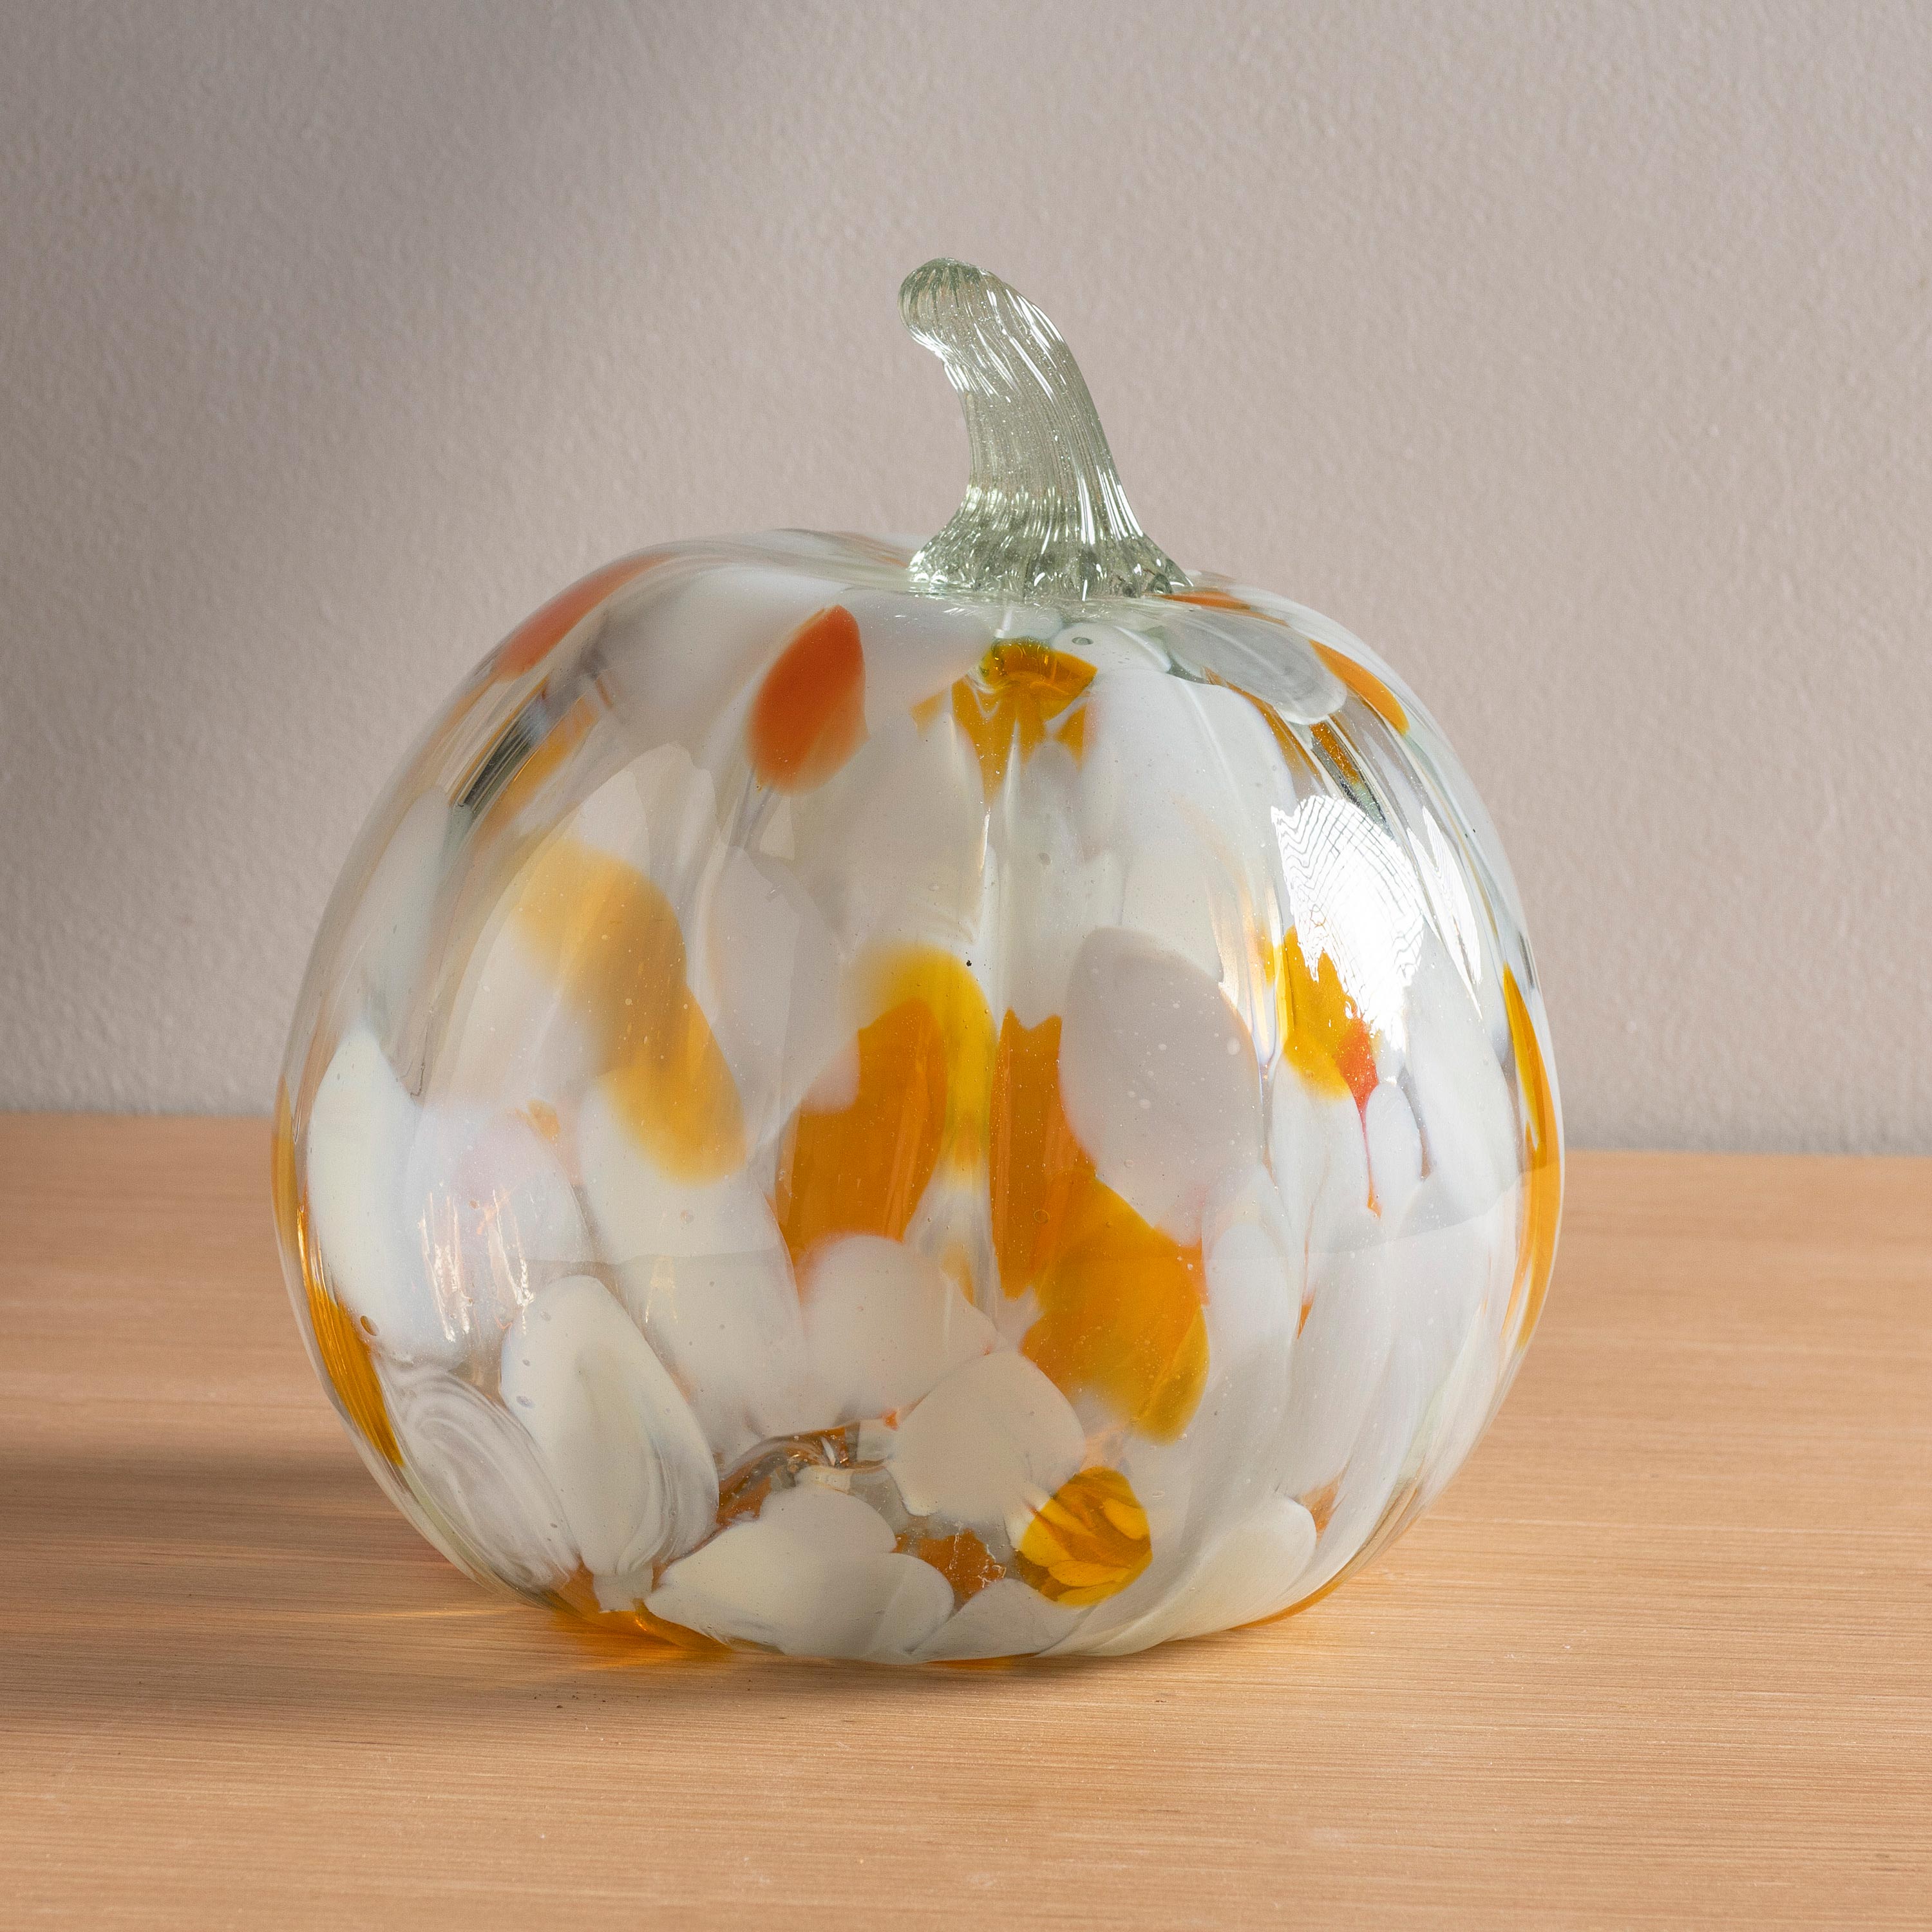 Handcrafted Recycled Glass Pumpkin